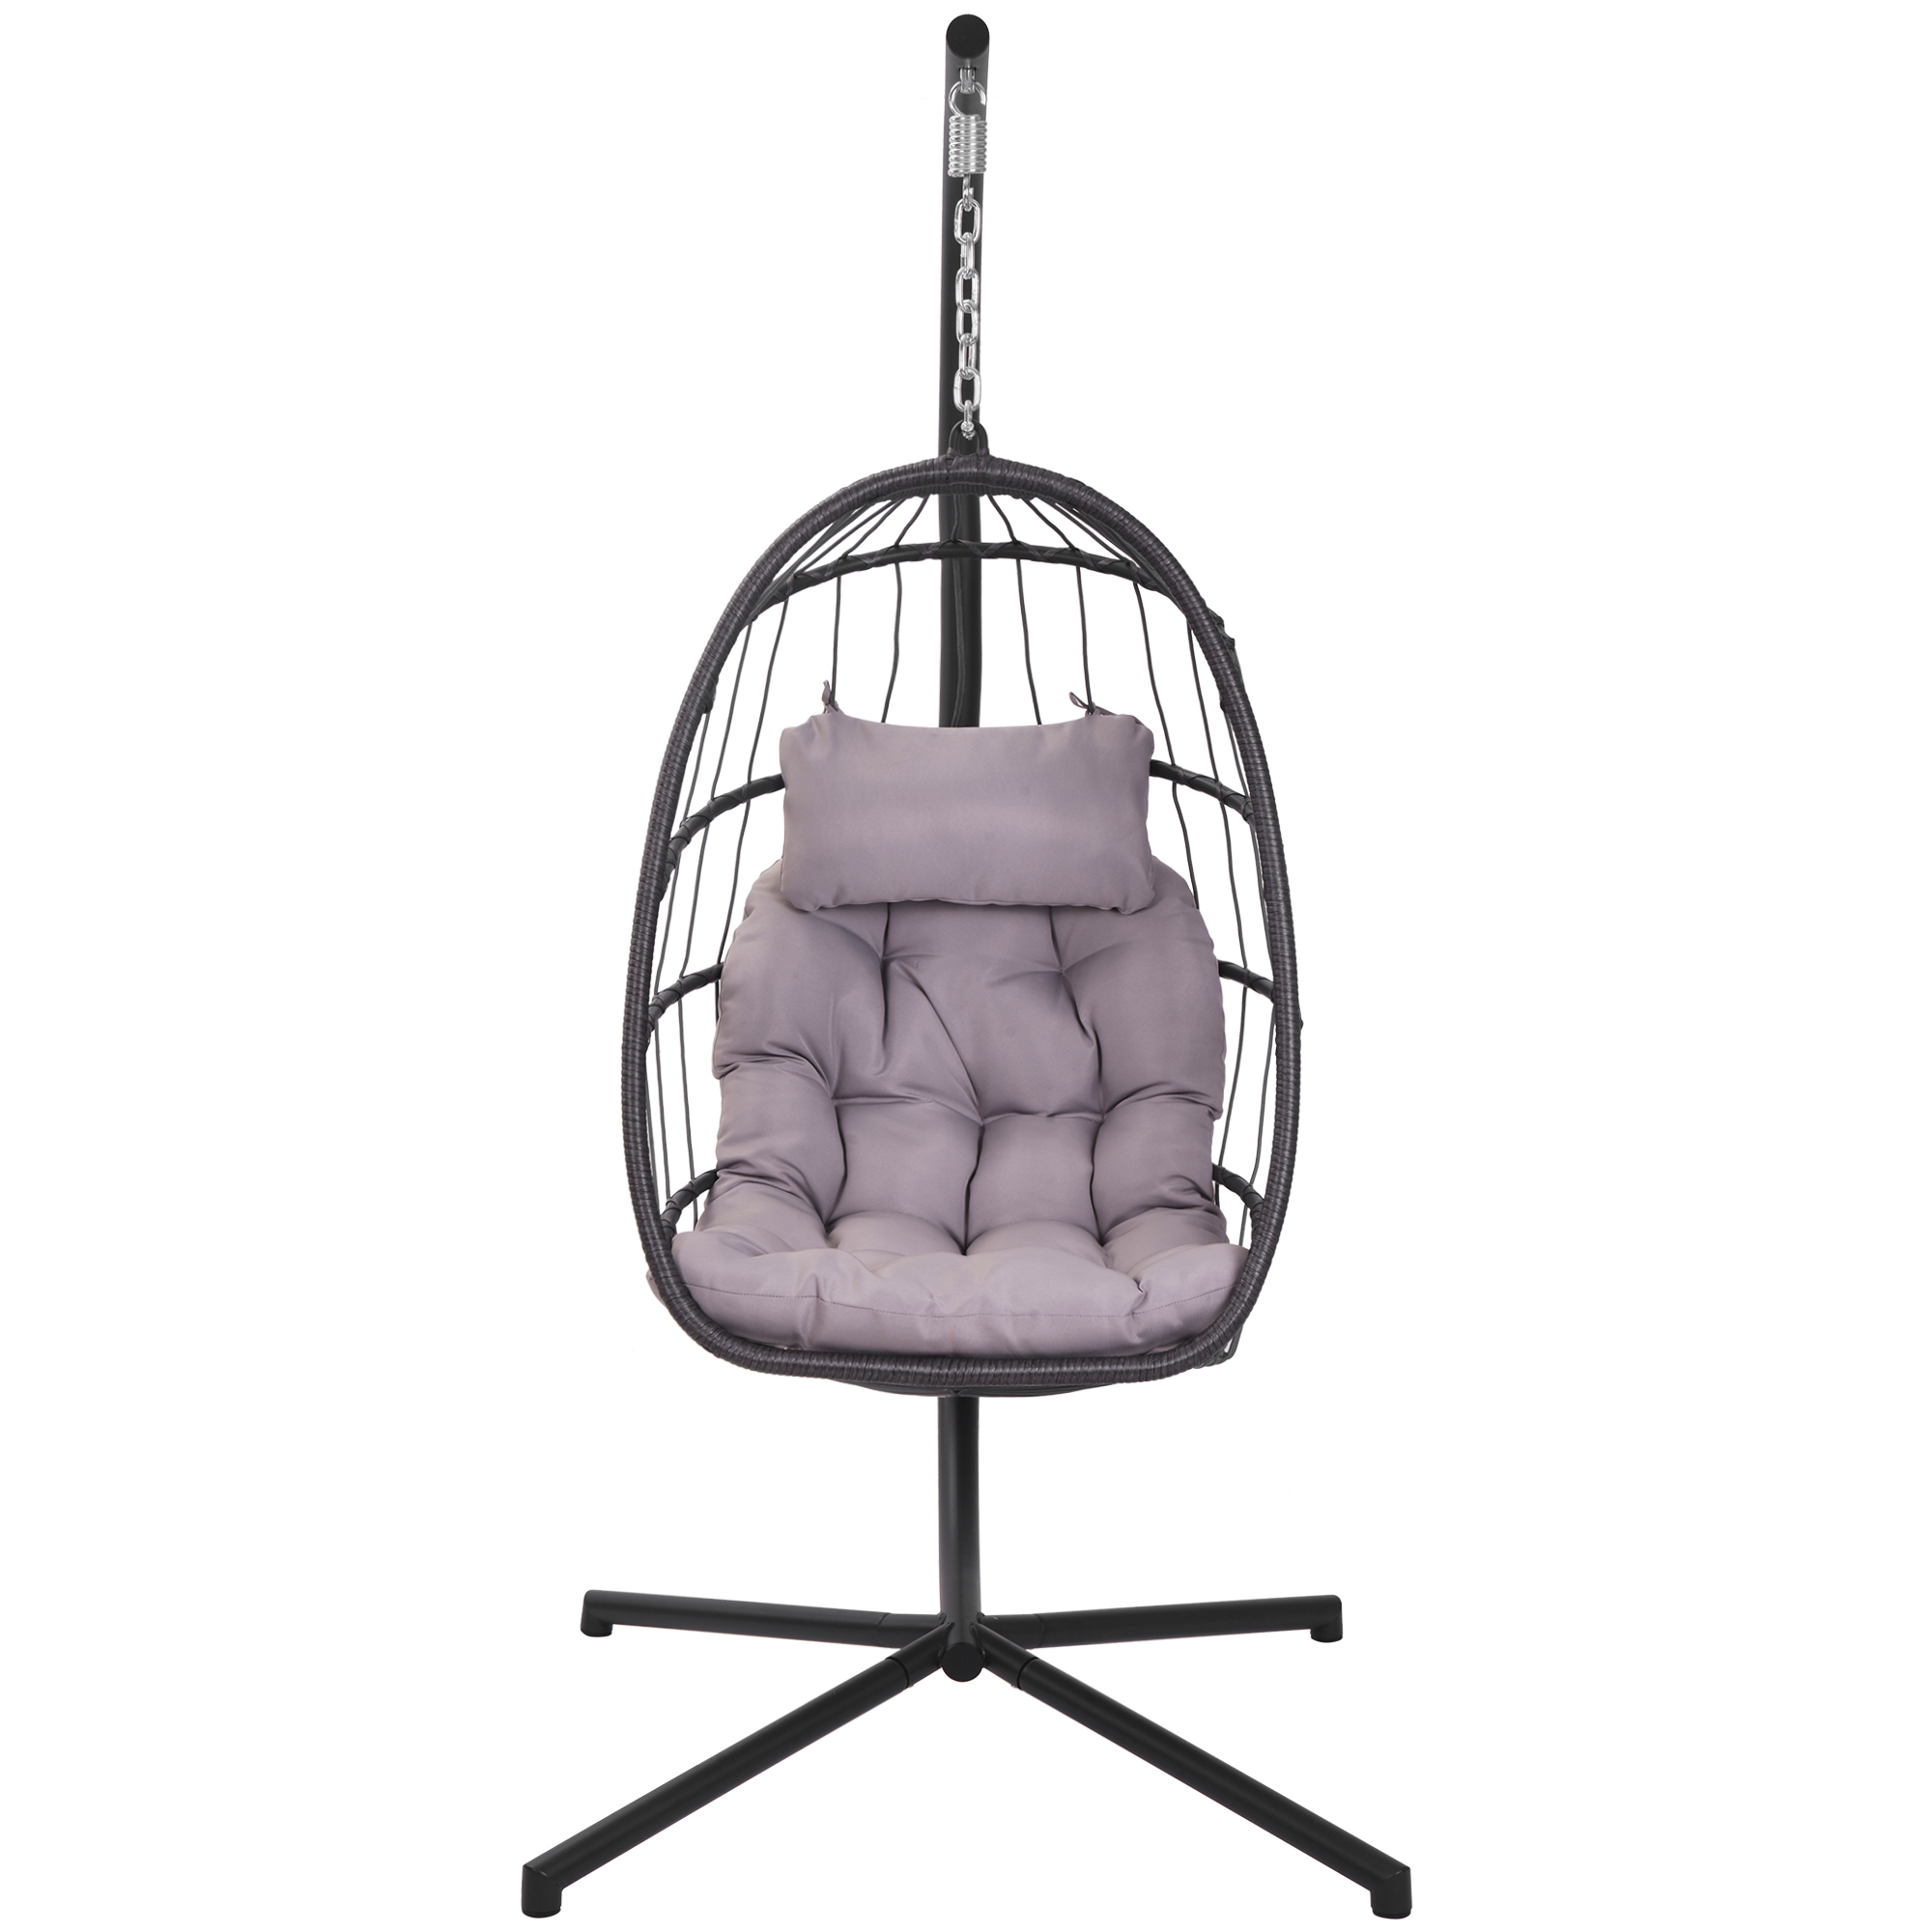 Outdoor Swing Chair, Wicker Egg Chair with Stand and Cushions, Hanging Chair for Bedroom Patio Porch Balcony, Hammock Chair Outdoor Lounger, Gray - image 4 of 6